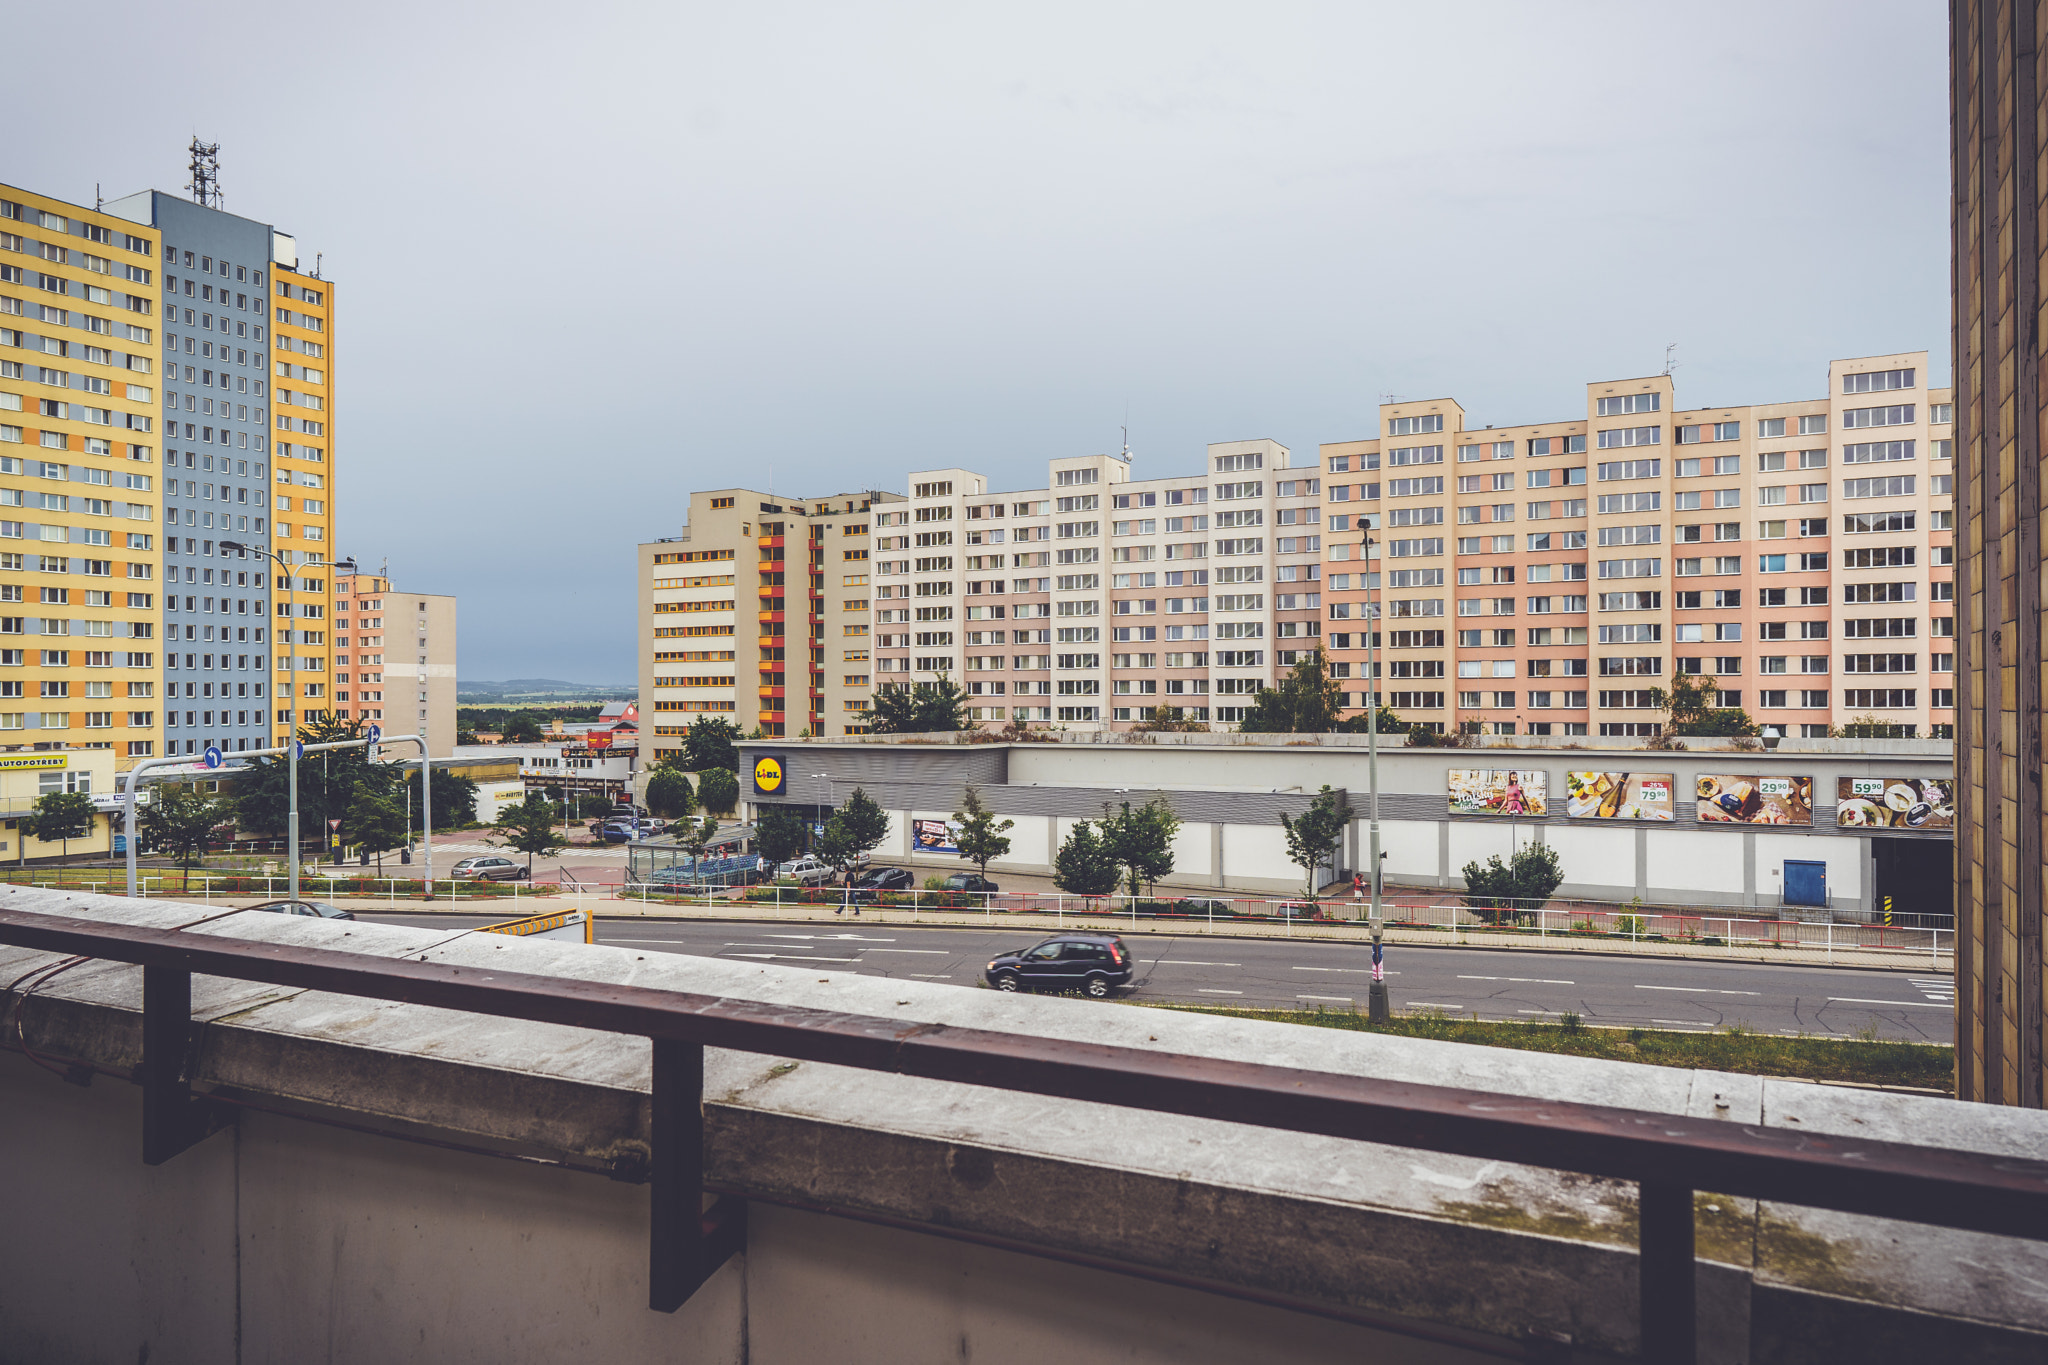 Sony a7 + ZEISS Batis 25mm F2 sample photo. Prague - southern town housing estate photography